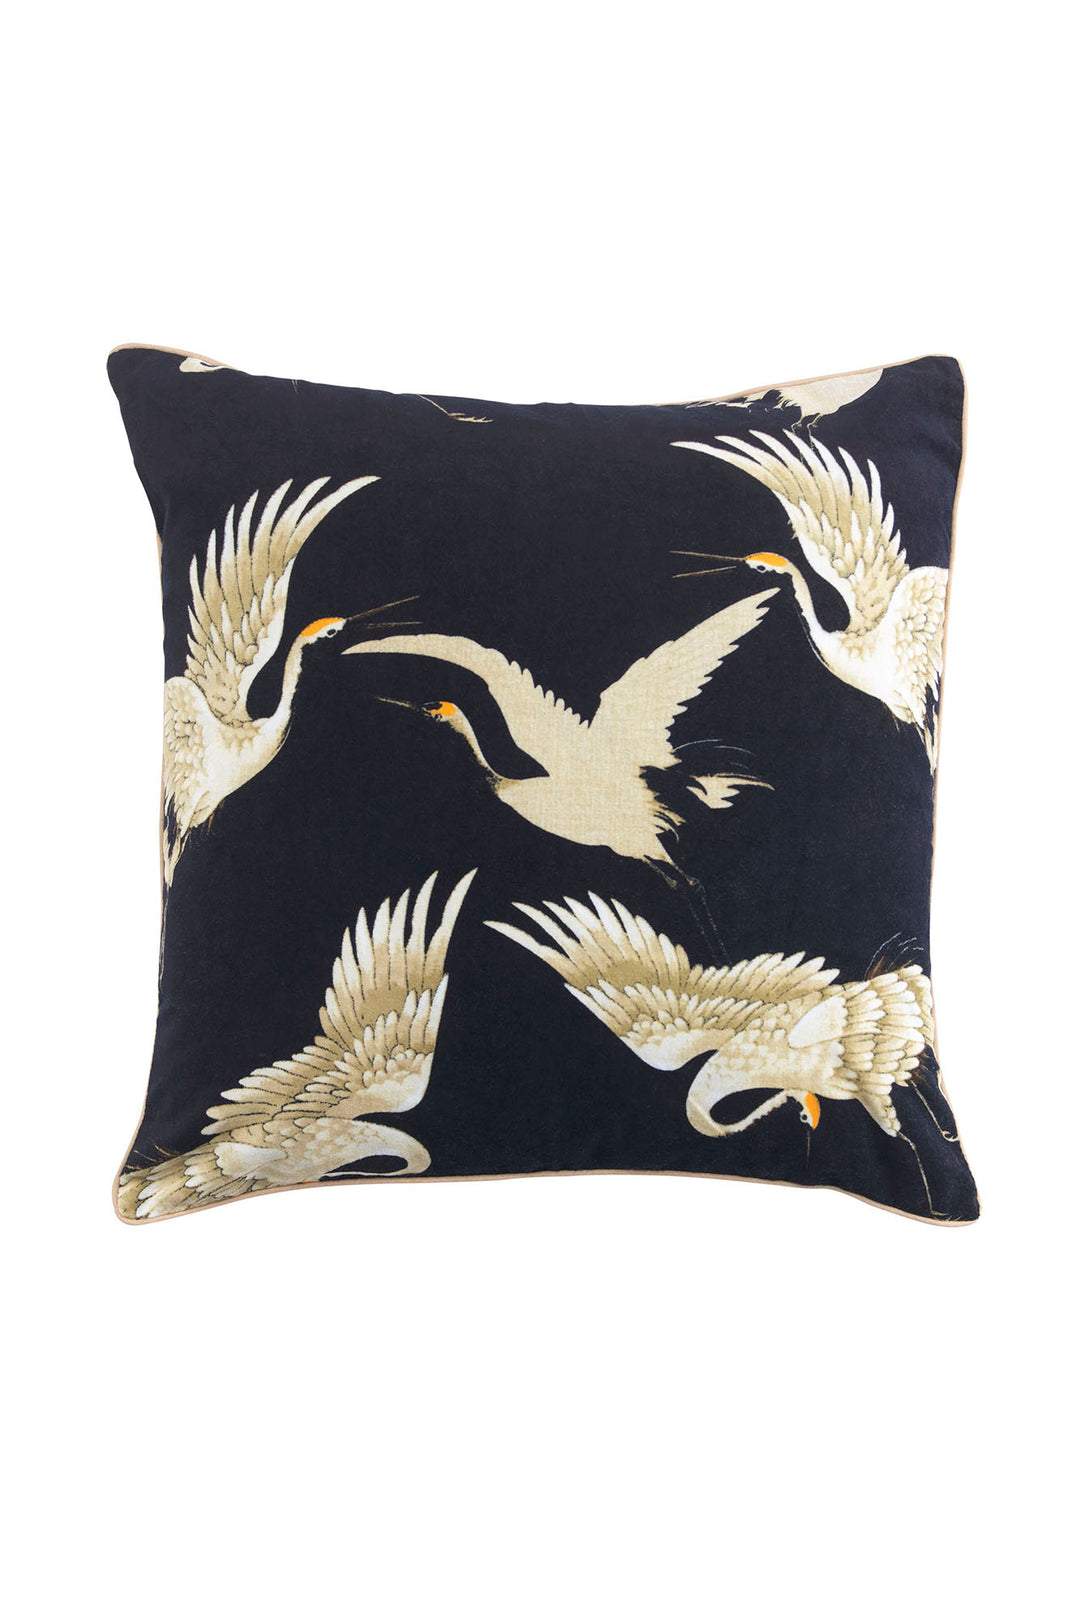 Stork Crane Black and White Cushion - These limited edition velvet cushions are 50cm x 50cm and can purchased with or without an ethically sourced duck feather inner. 